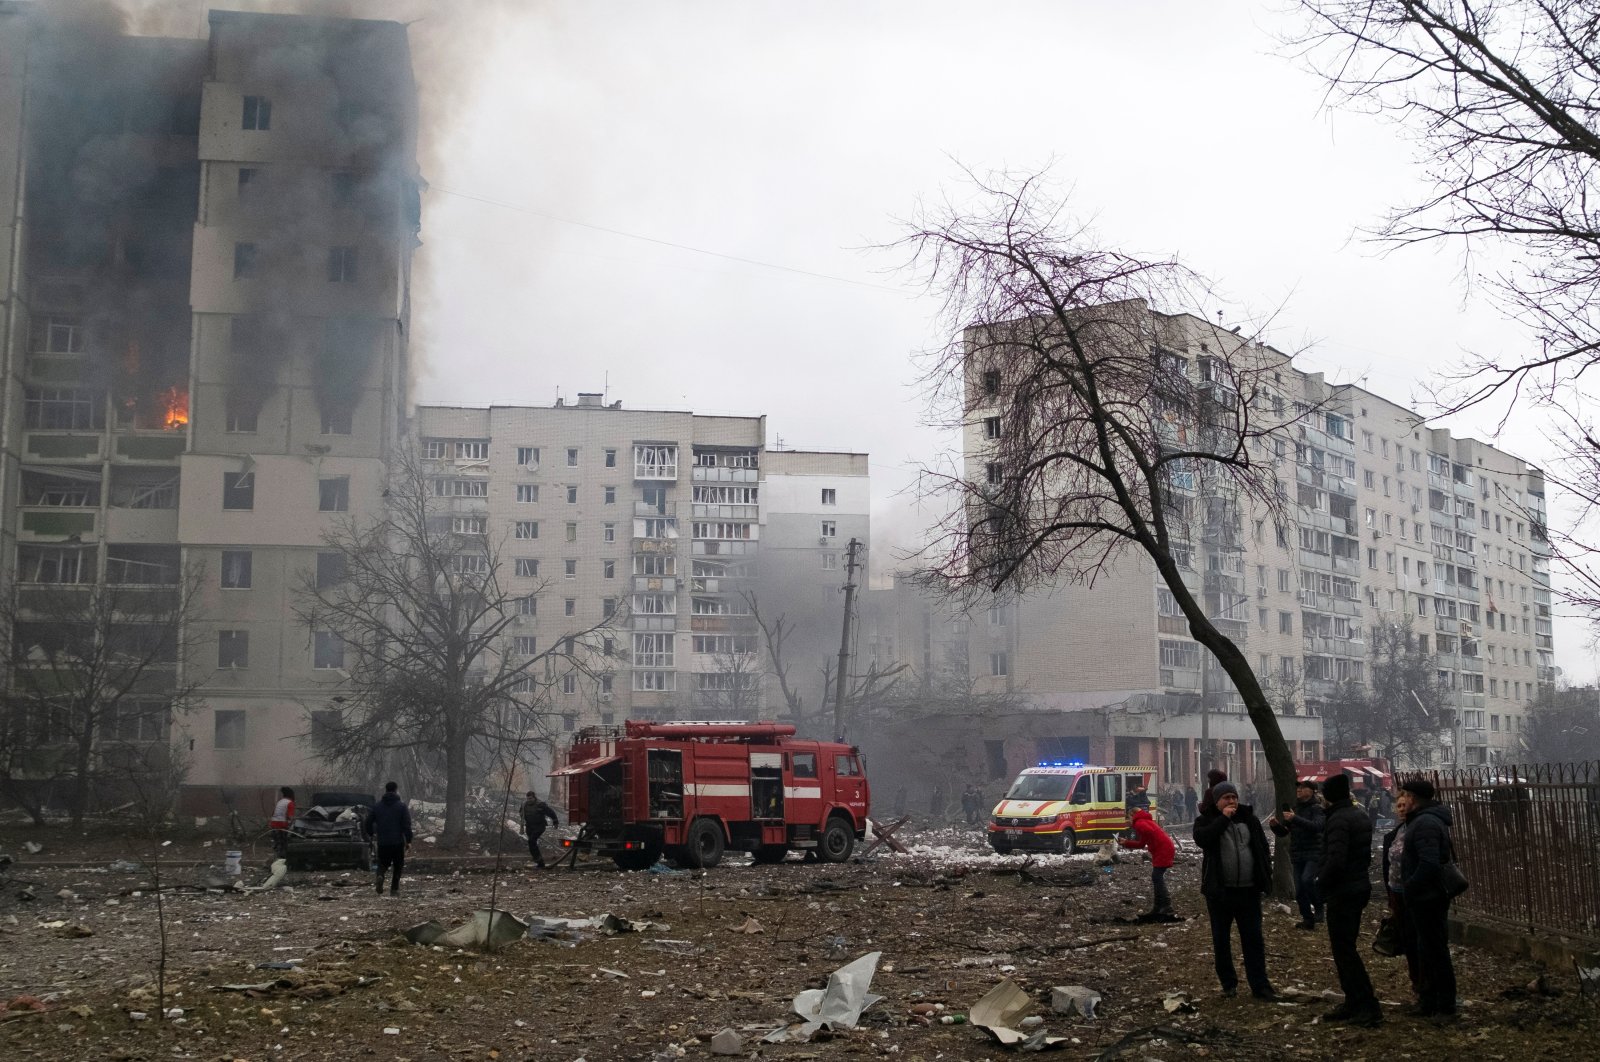 Flames and smoke billow from a residential building damaged by recent shelling, as Russia&#039;s invasion of Ukraine continues in Chernihiv, Ukraine, March 3, 2022. (Reuters Photo)